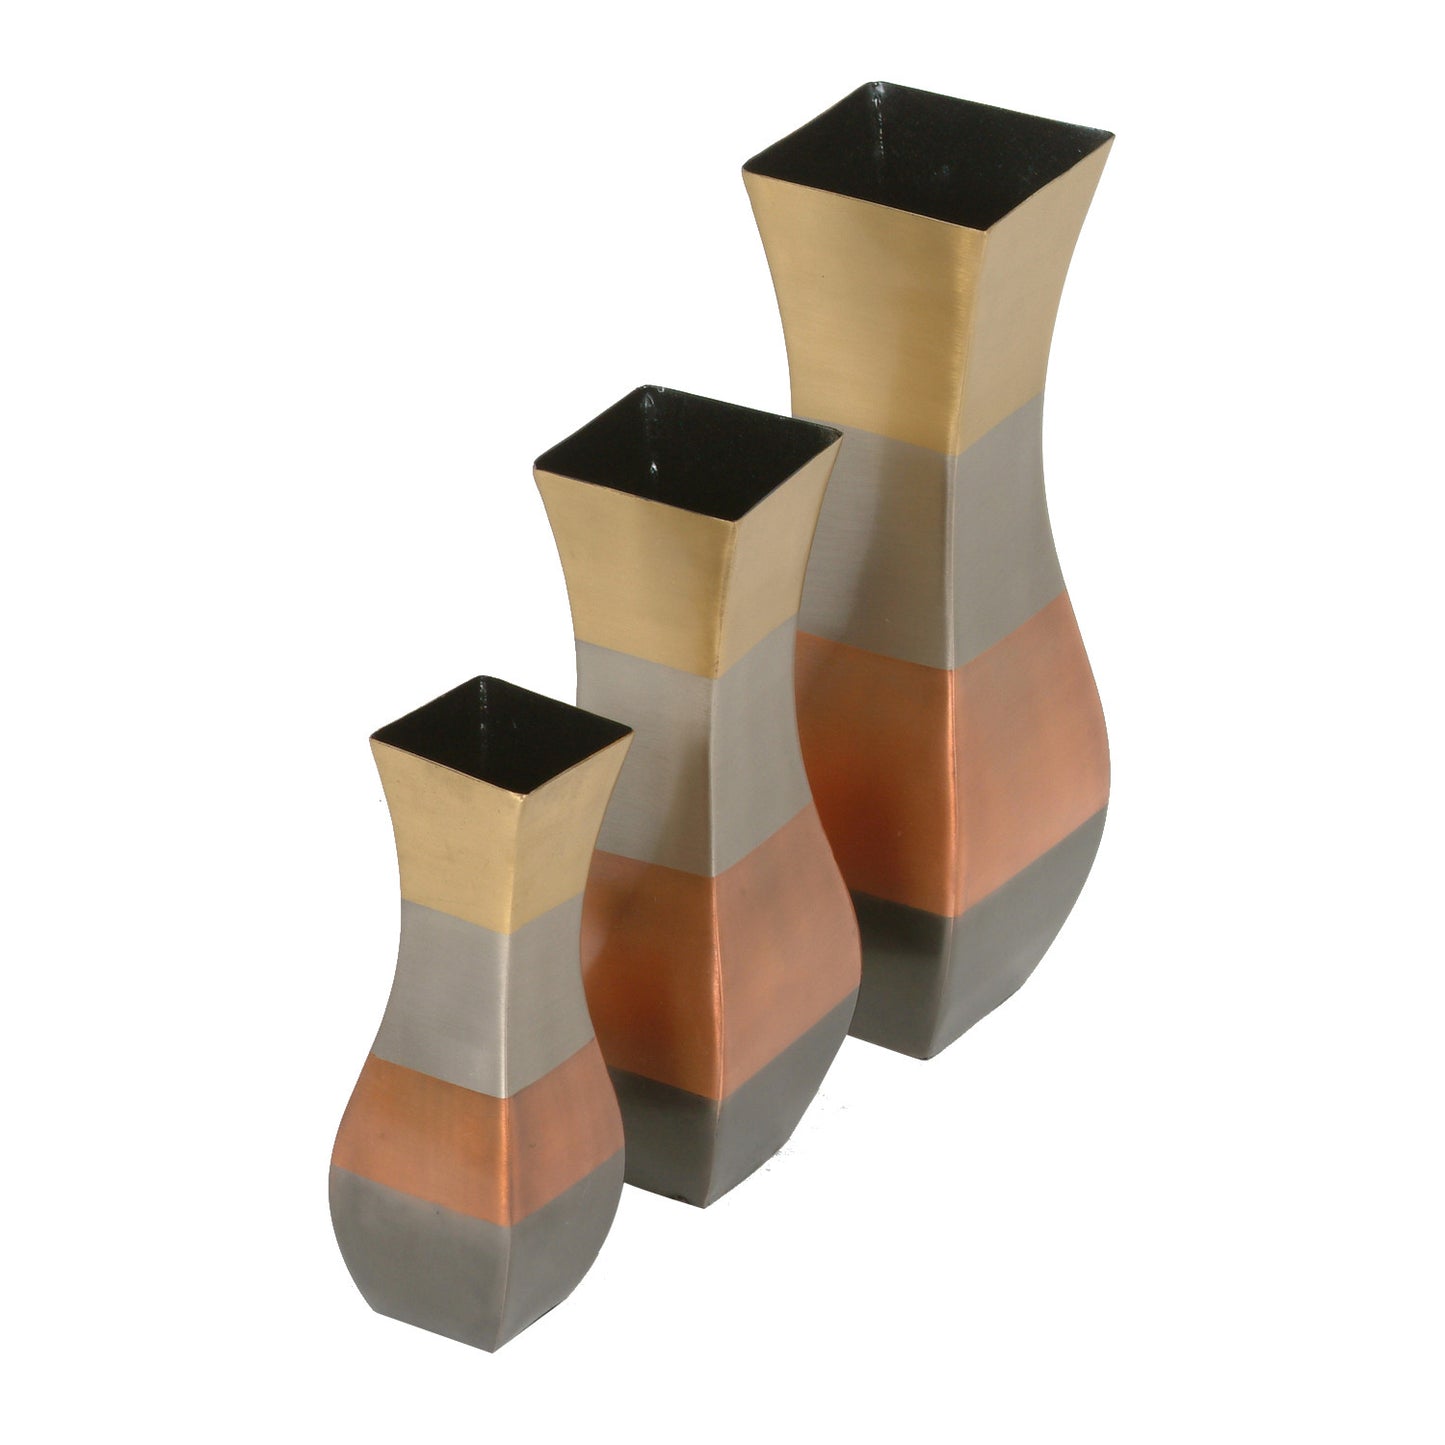 GiftBay 8004 (S/3) Brass Metal Vase Set of 3, Sizes 11", 9" & 7" Height, Four-Tone Antique Black, Copper, Silver, and Gold Plated Finish